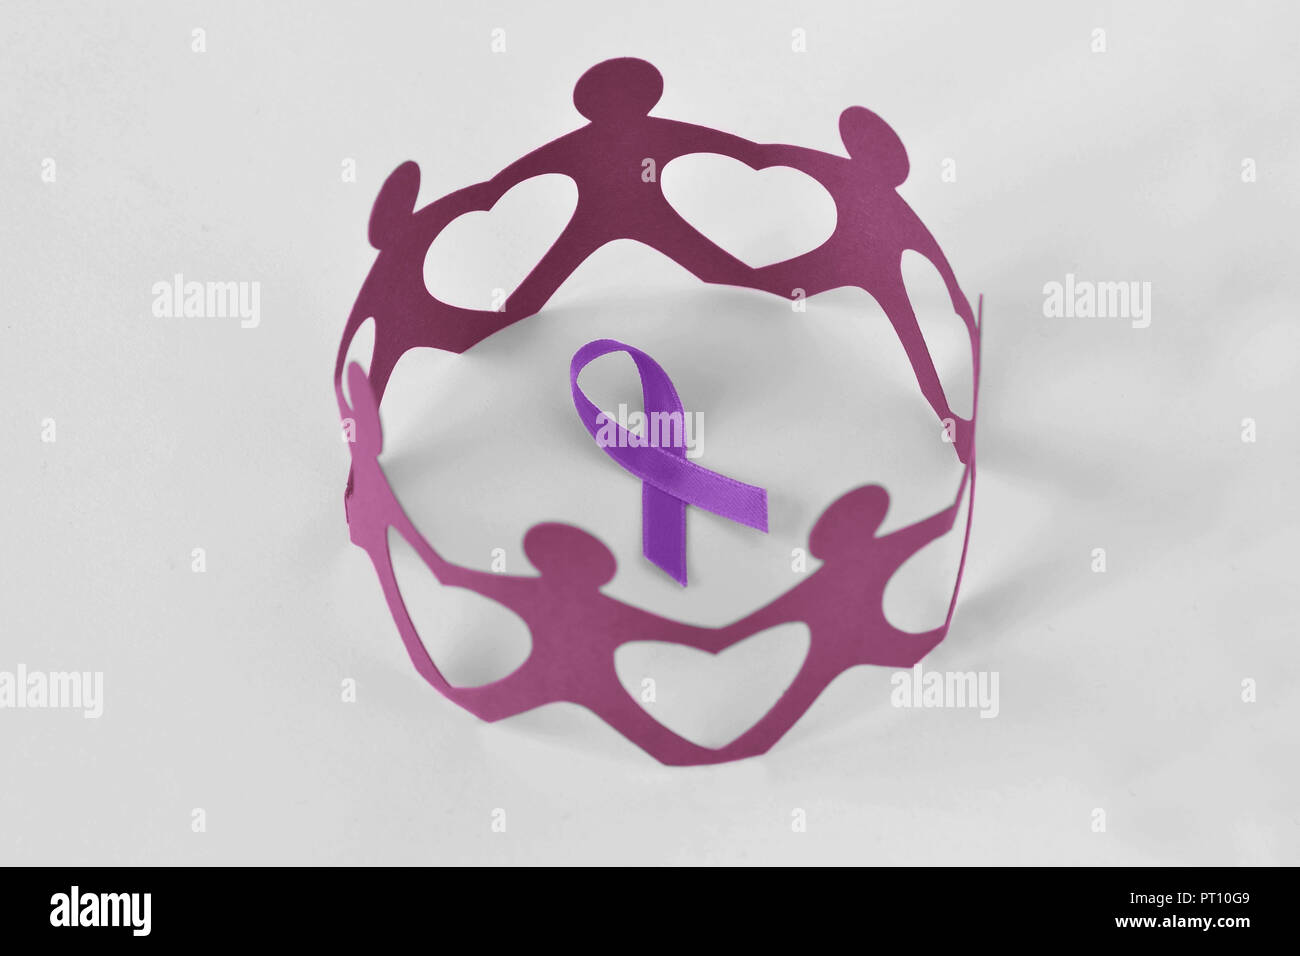 Paper people in a circle around violet ribbon on white background - Concept of Domestic Violence awareness; Alzheimer's disease, Pancreatic cancer, Ep Stock Photo